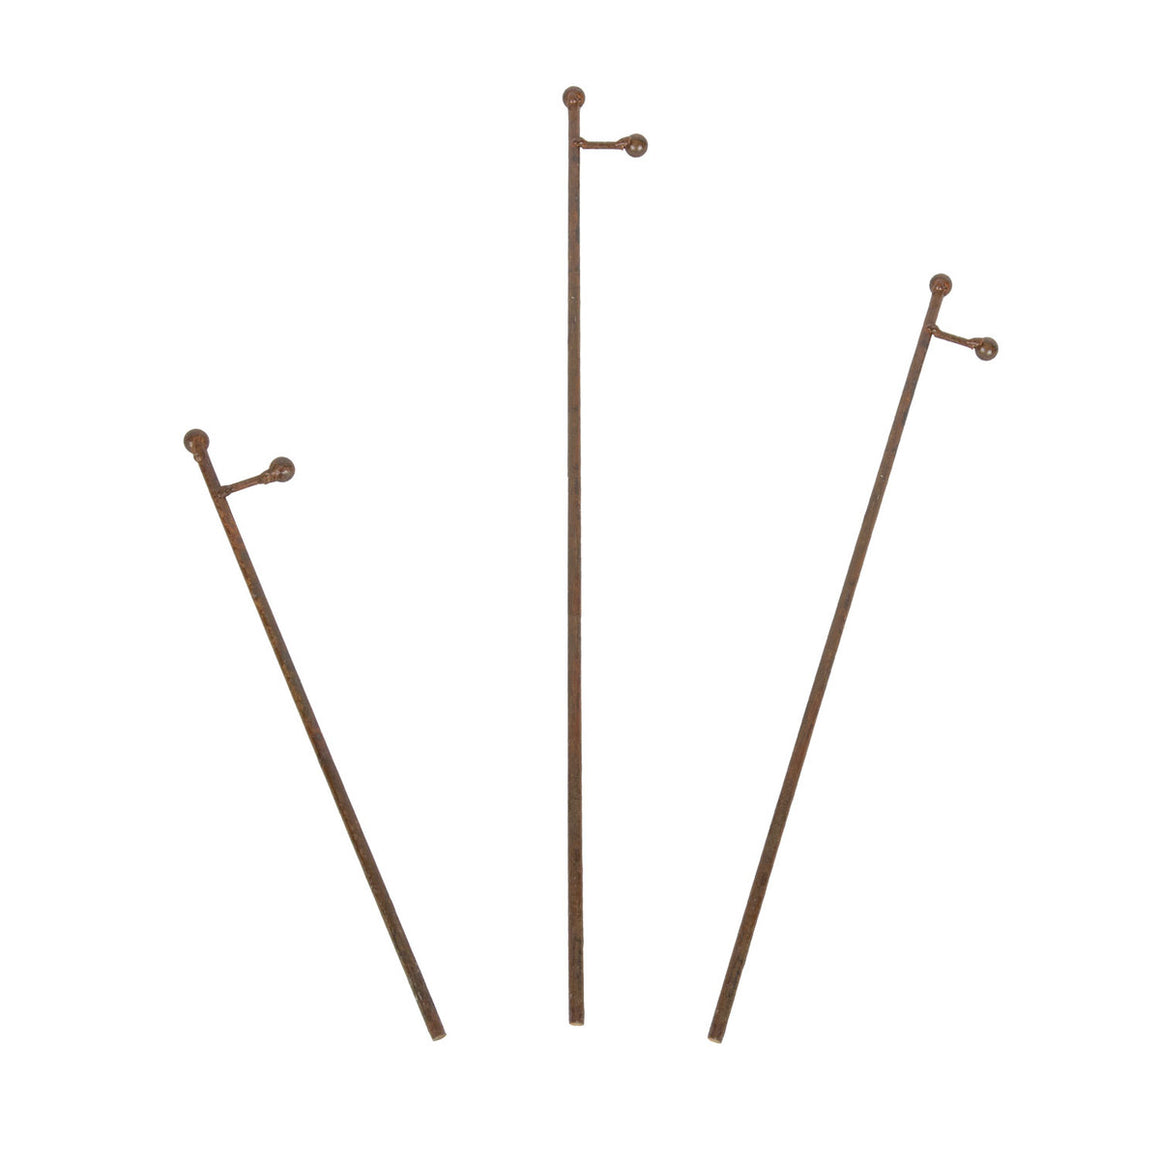 Roundtop Rust Mini Gallery Display Stakes